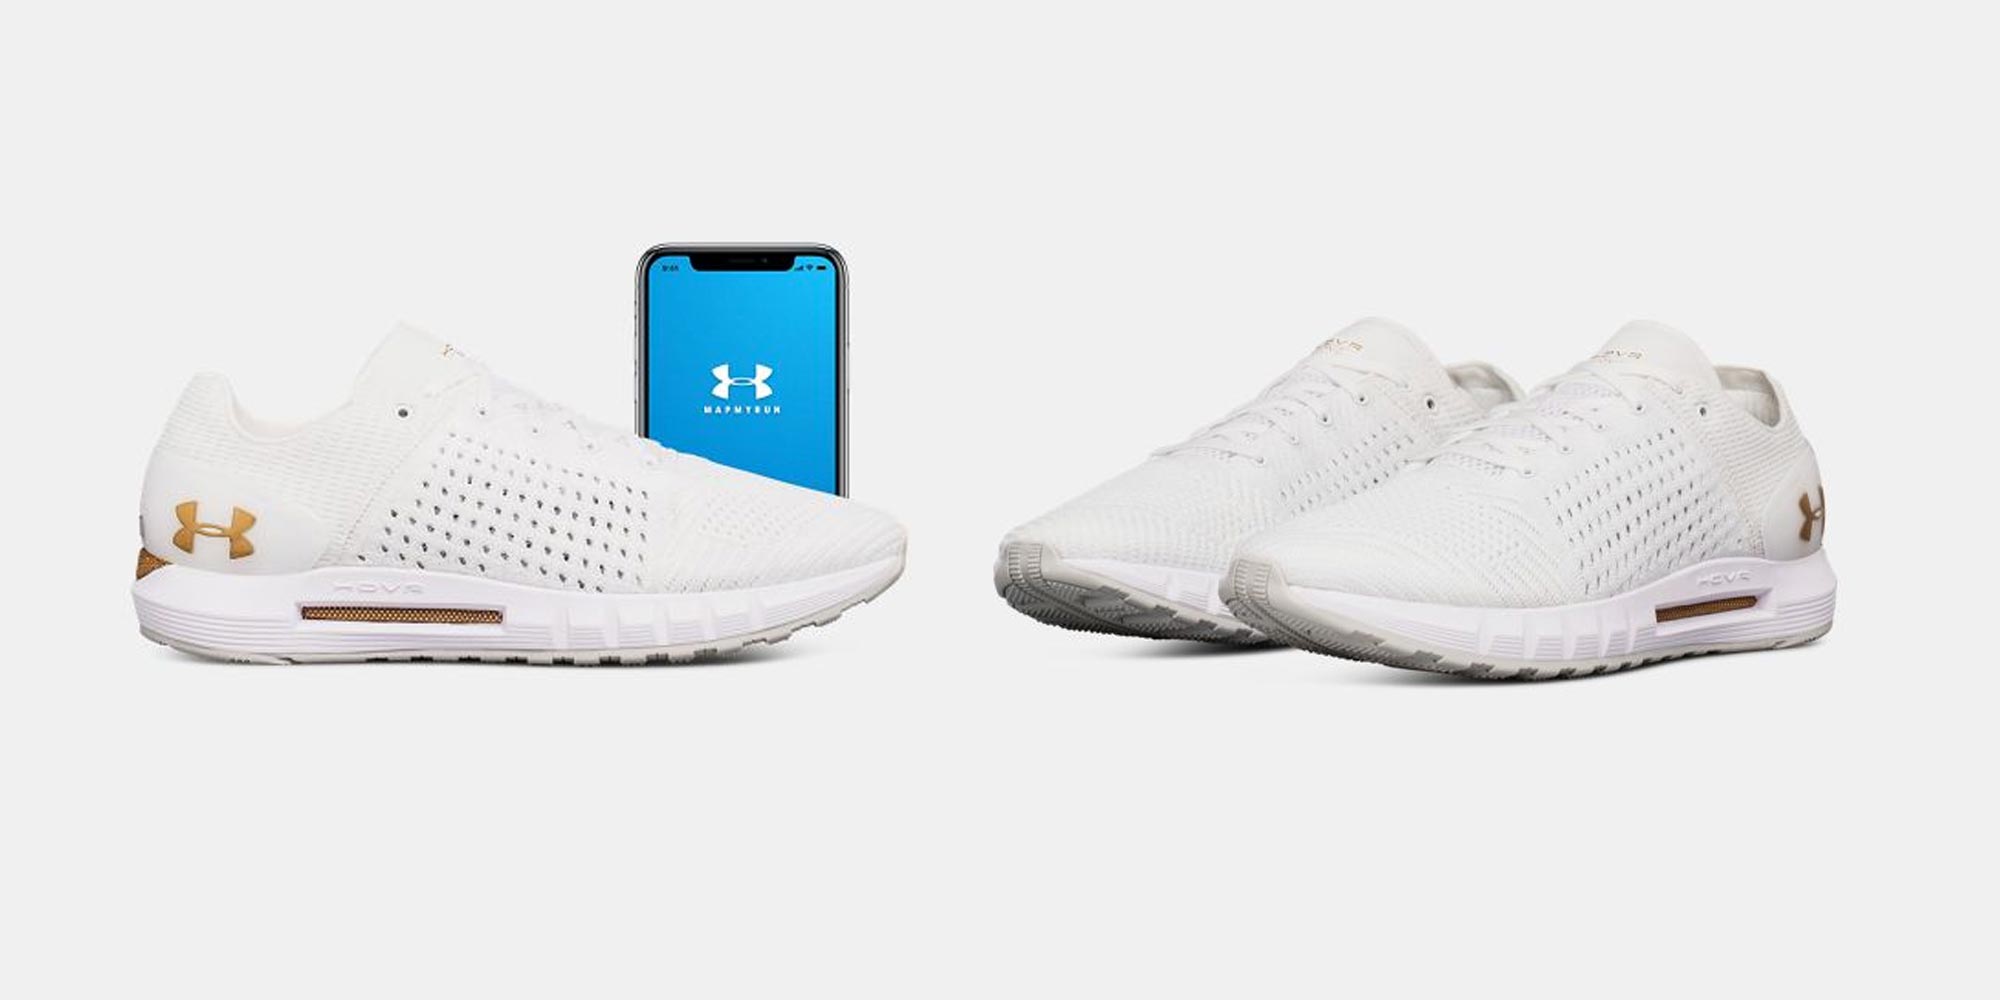 Under Armour Hovr, a running shoe to track more